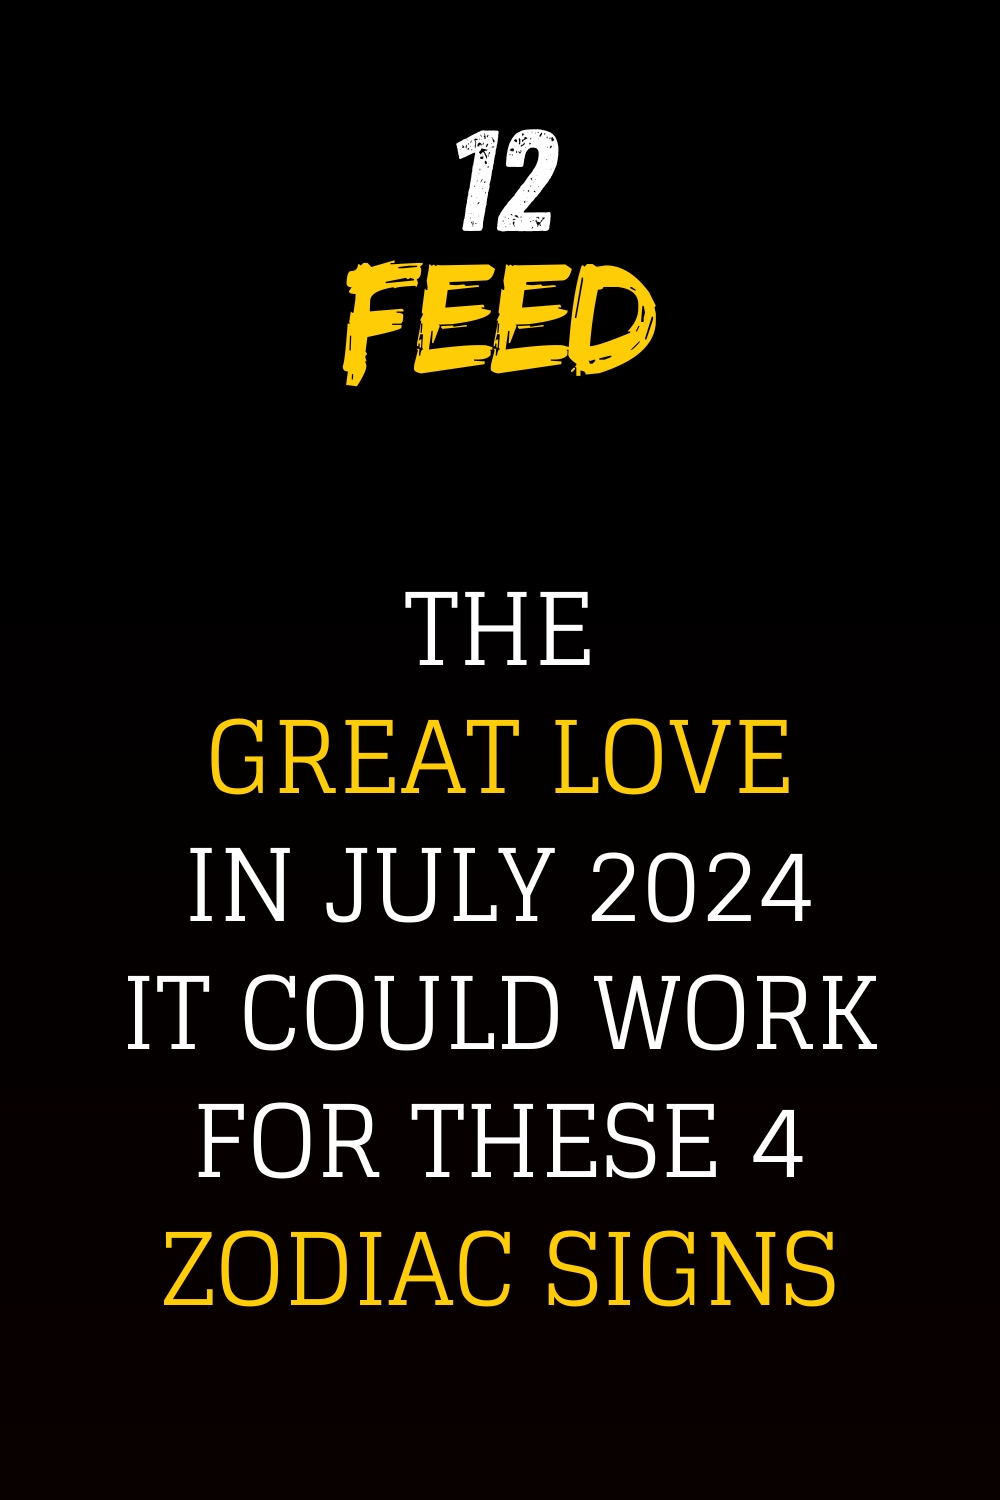 The great love in July 2024 It could work for these 4 zodiac signs